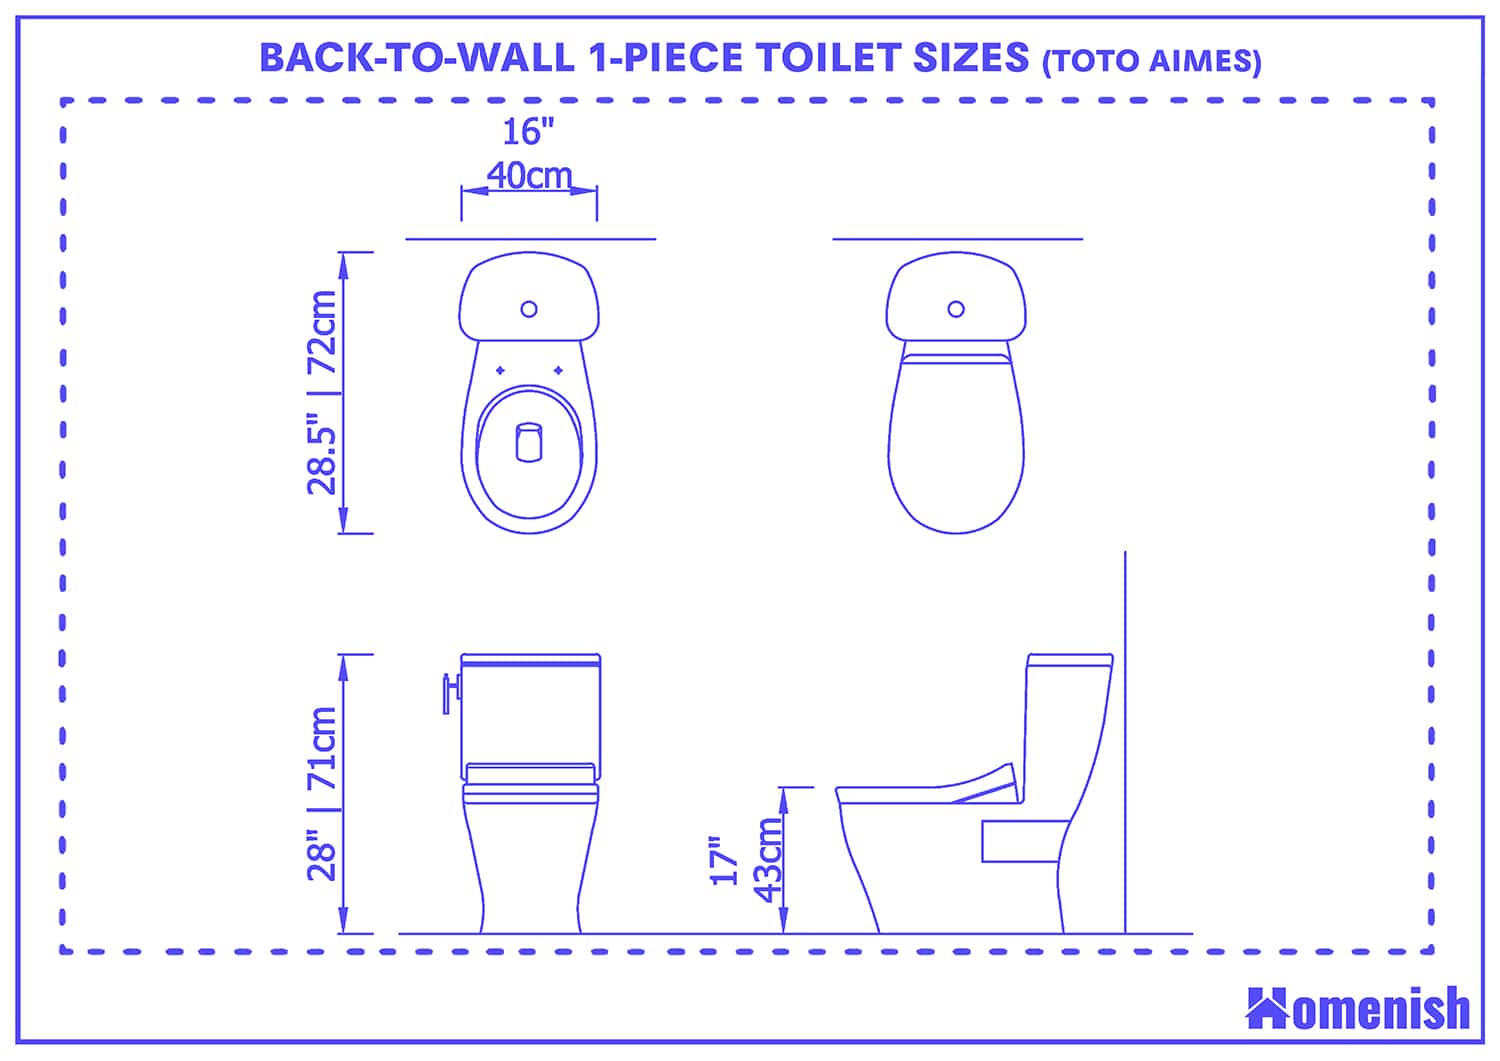 Back to wall 1 piece toilet